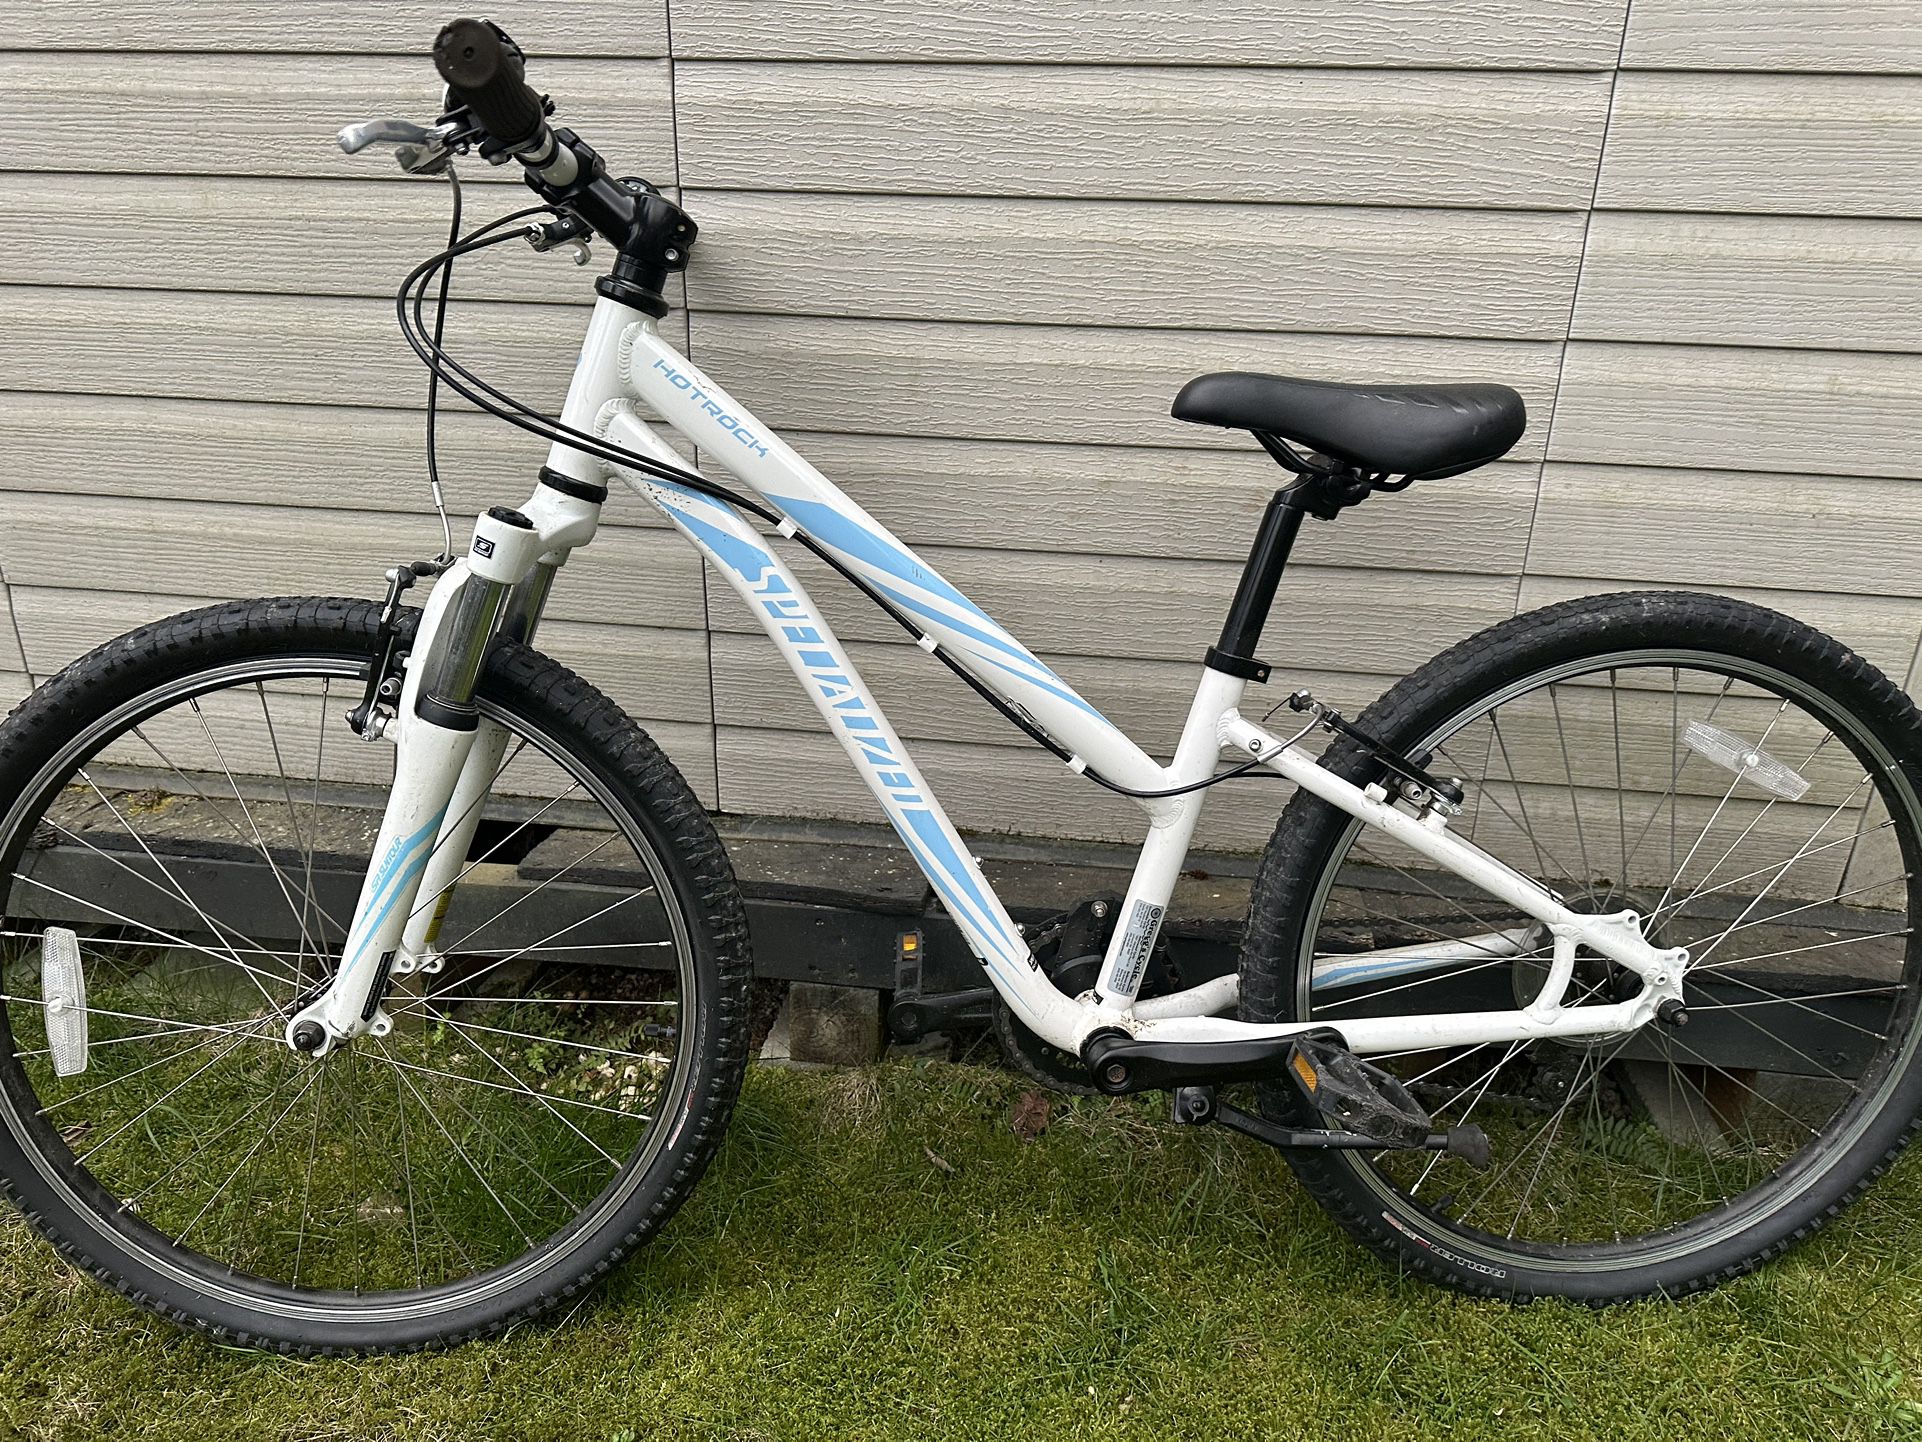 Youth Bike For Sale (Specialized 24)